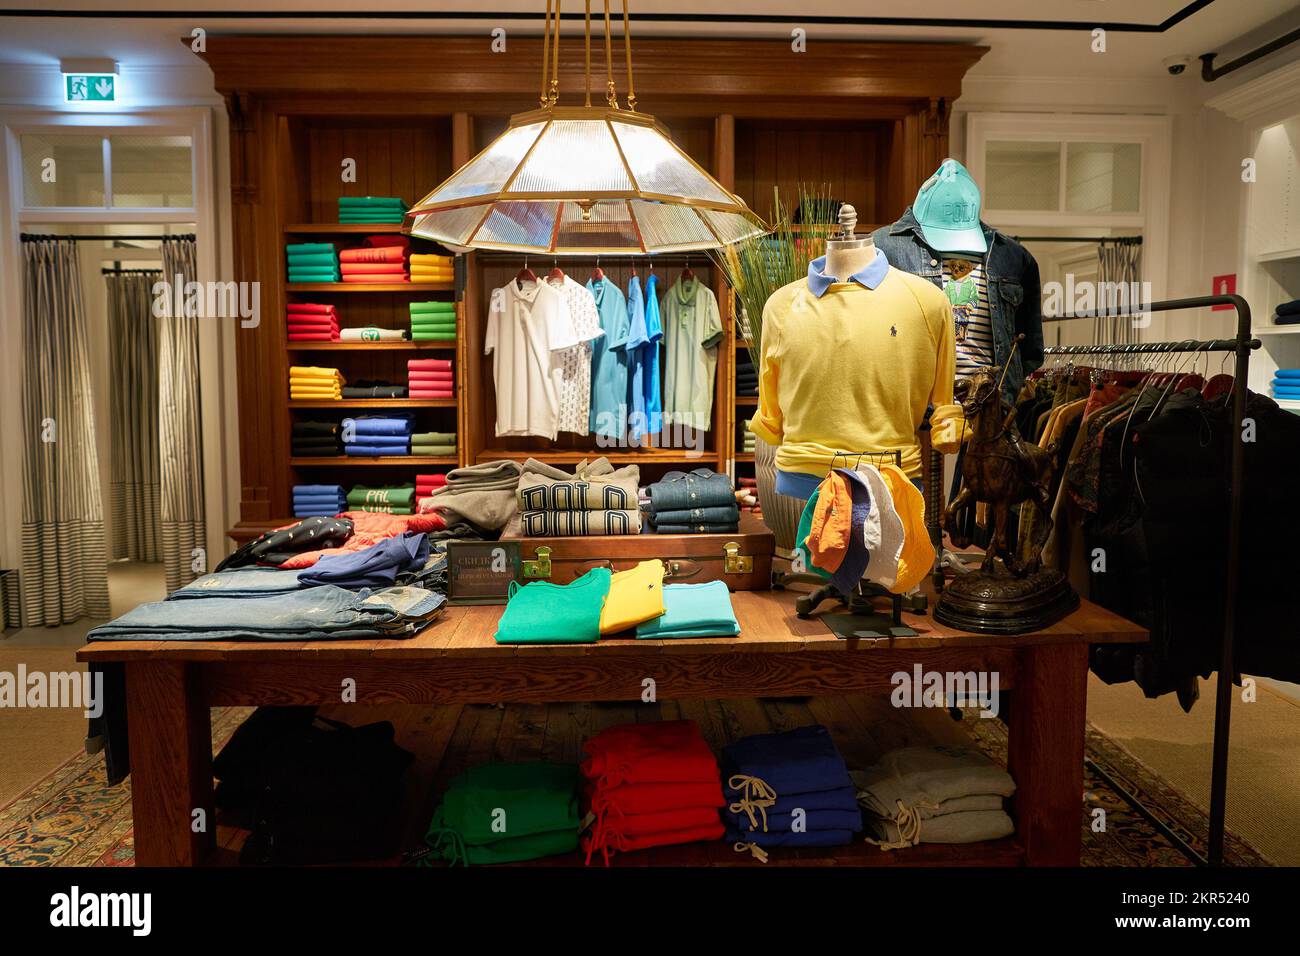 Chamber to Celebrate 15 Years of Polo Ralph Lauren Factory Store